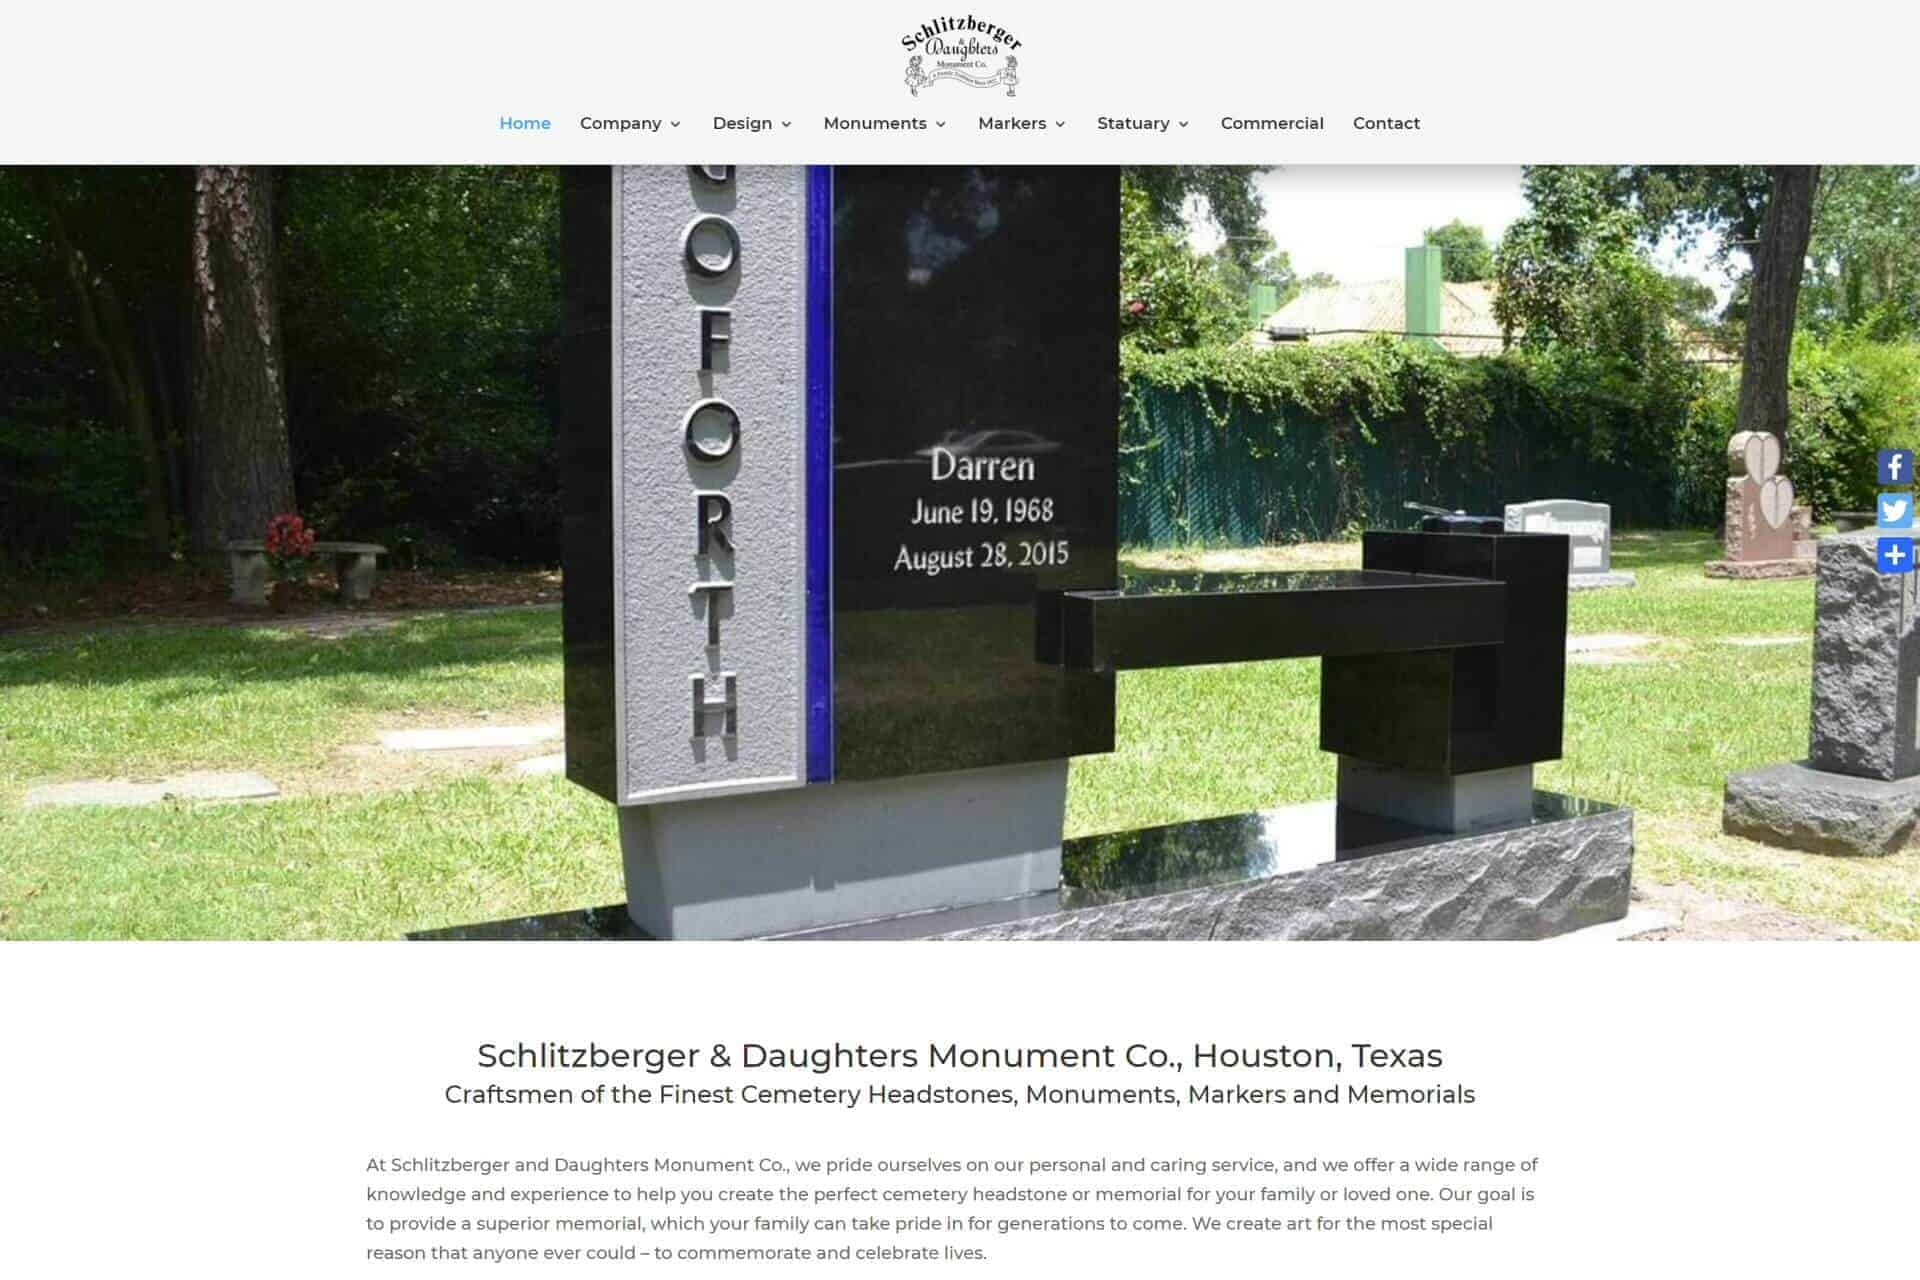 Schlitzberger & Daughters Cemetery Monuments, Markers & Memorials